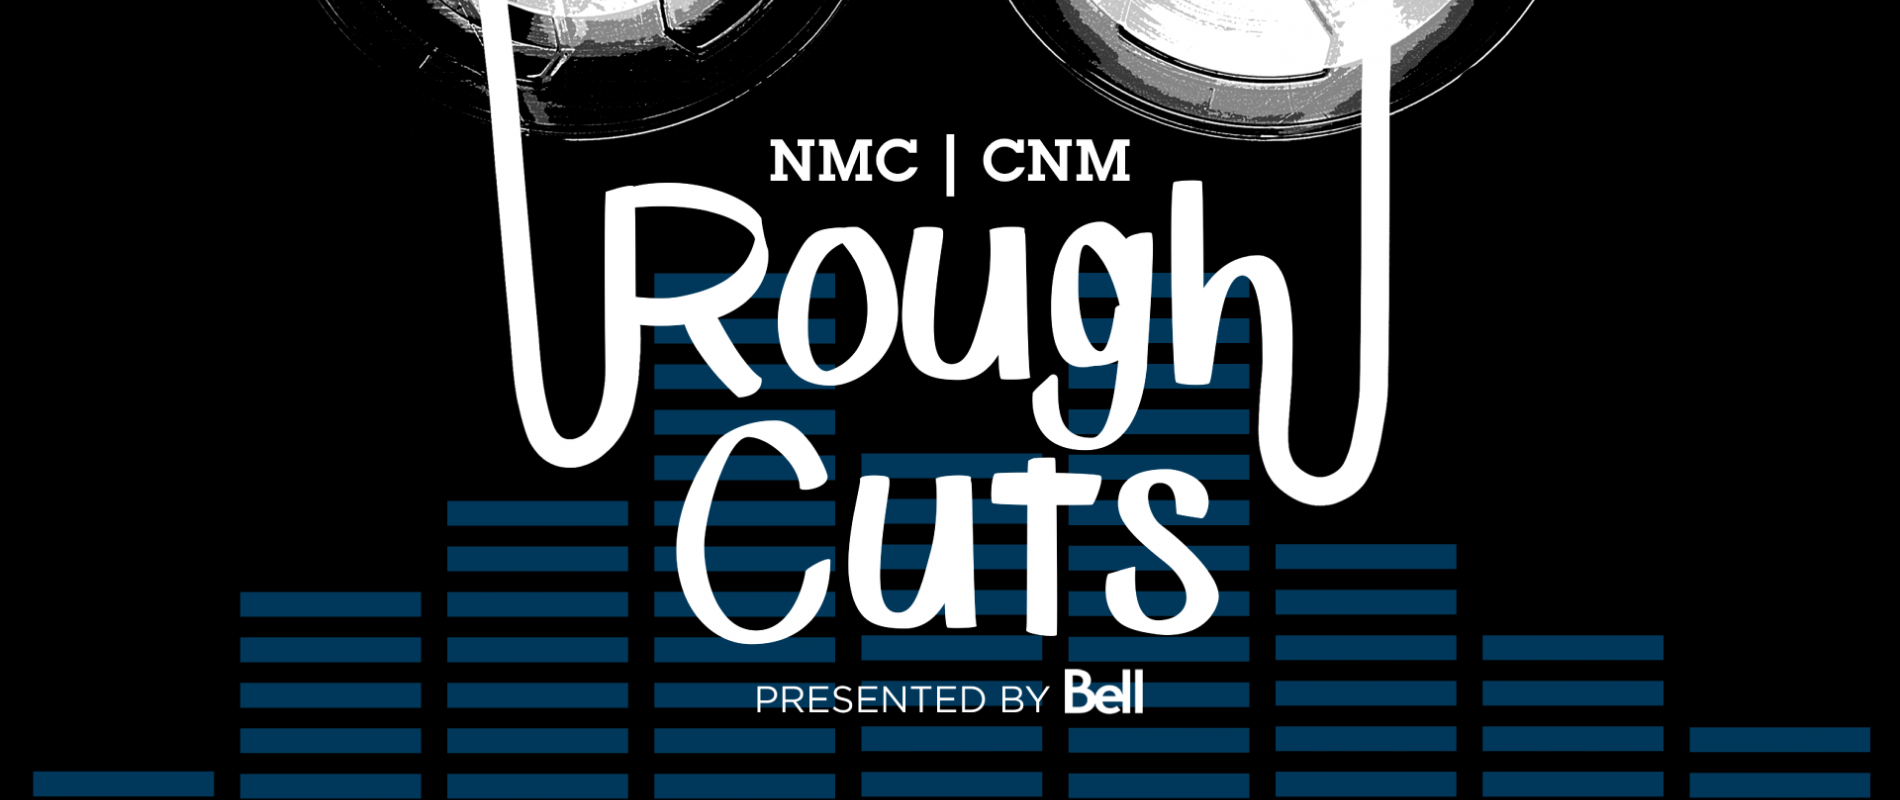 National Music Centre Announces Podcast Series, NMC Rough Cuts, Presented by Bell